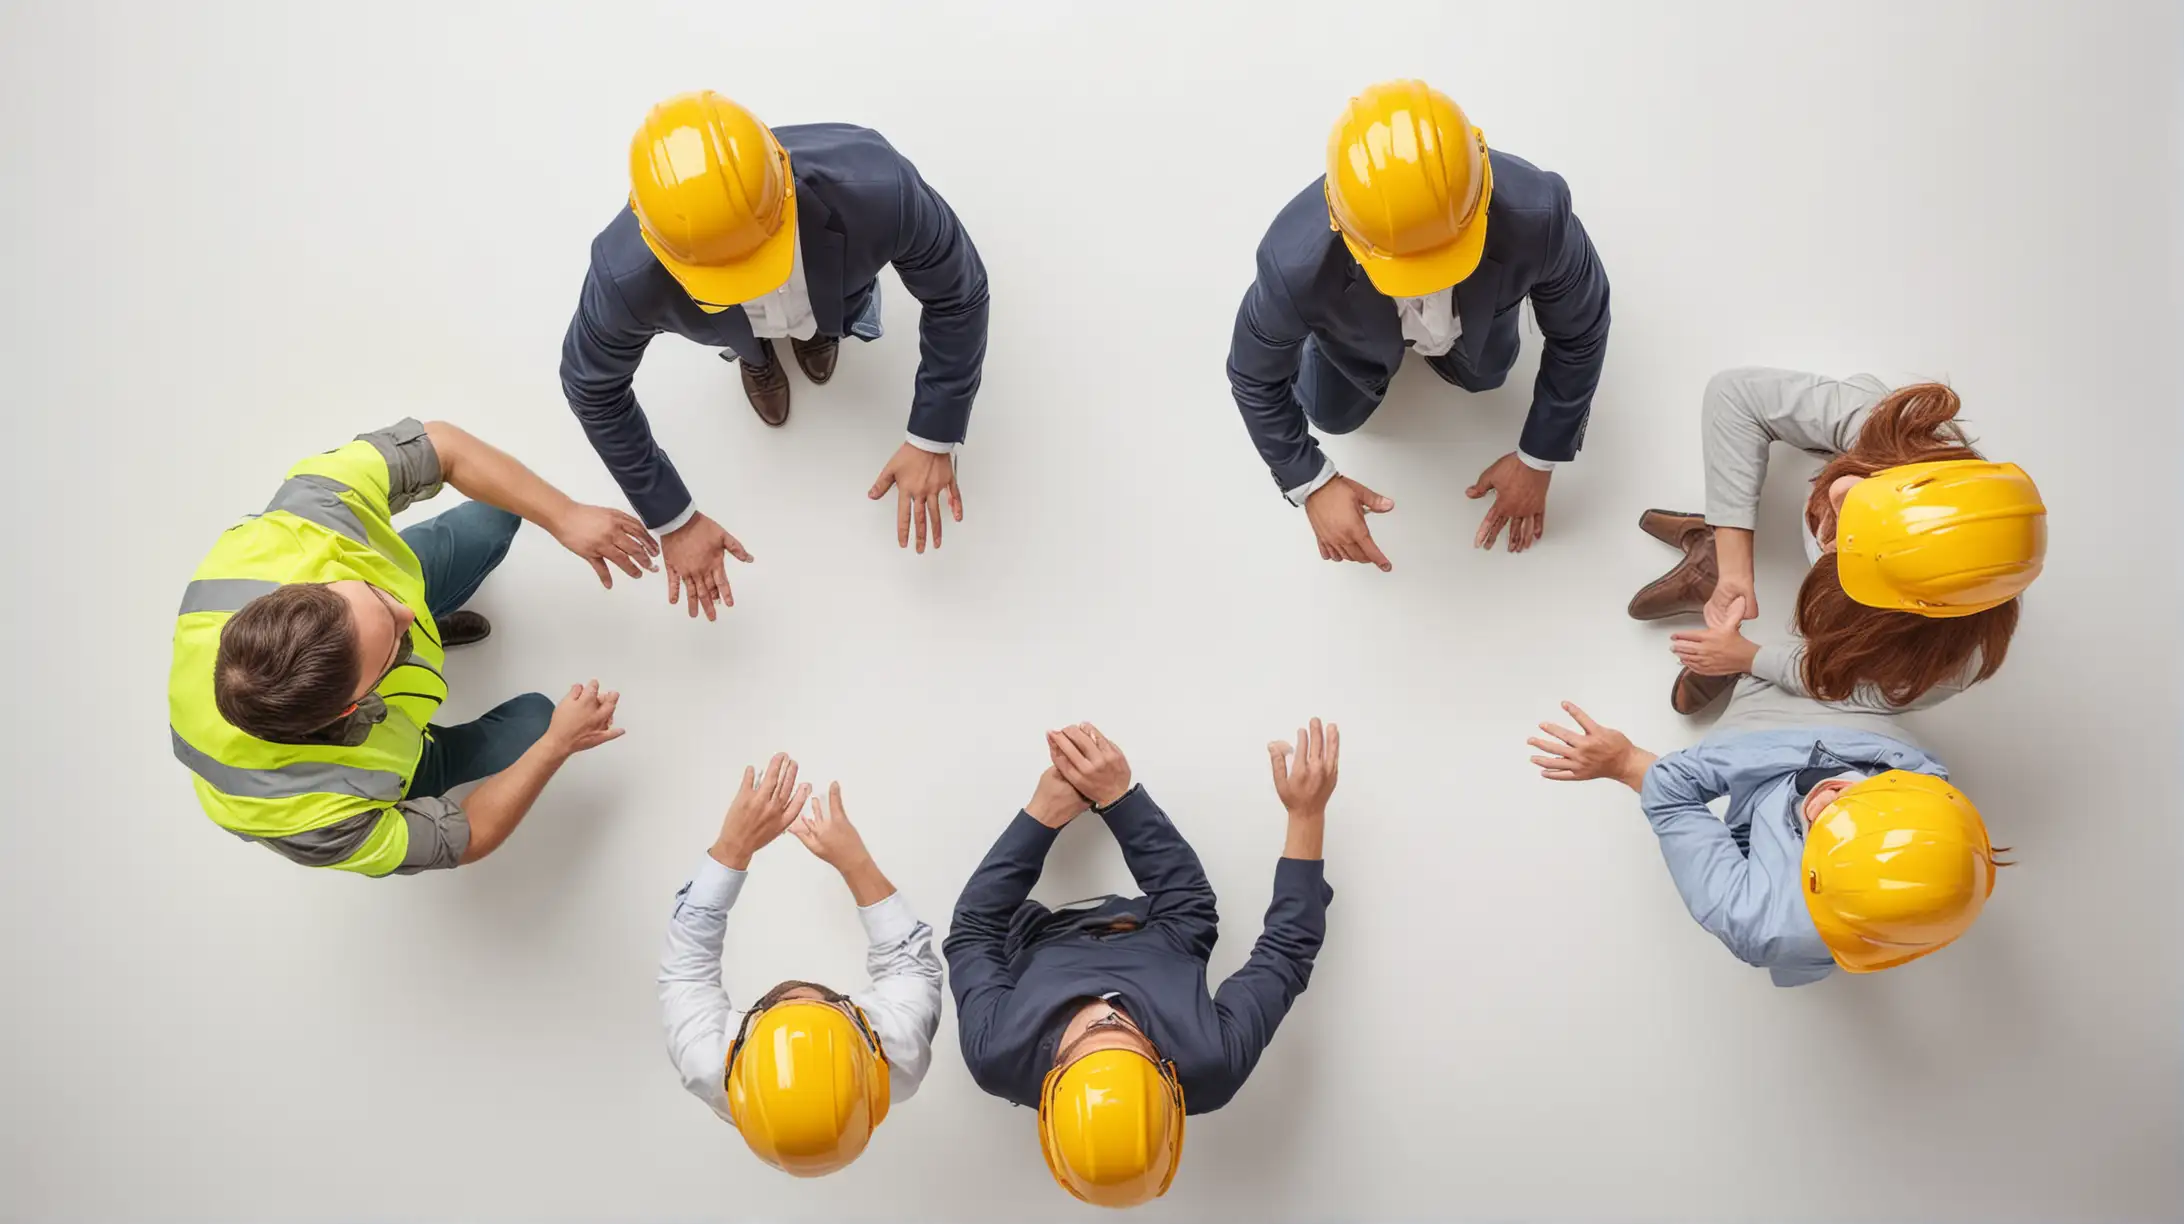 Top View Construction Workers in Hard Hats on White Background